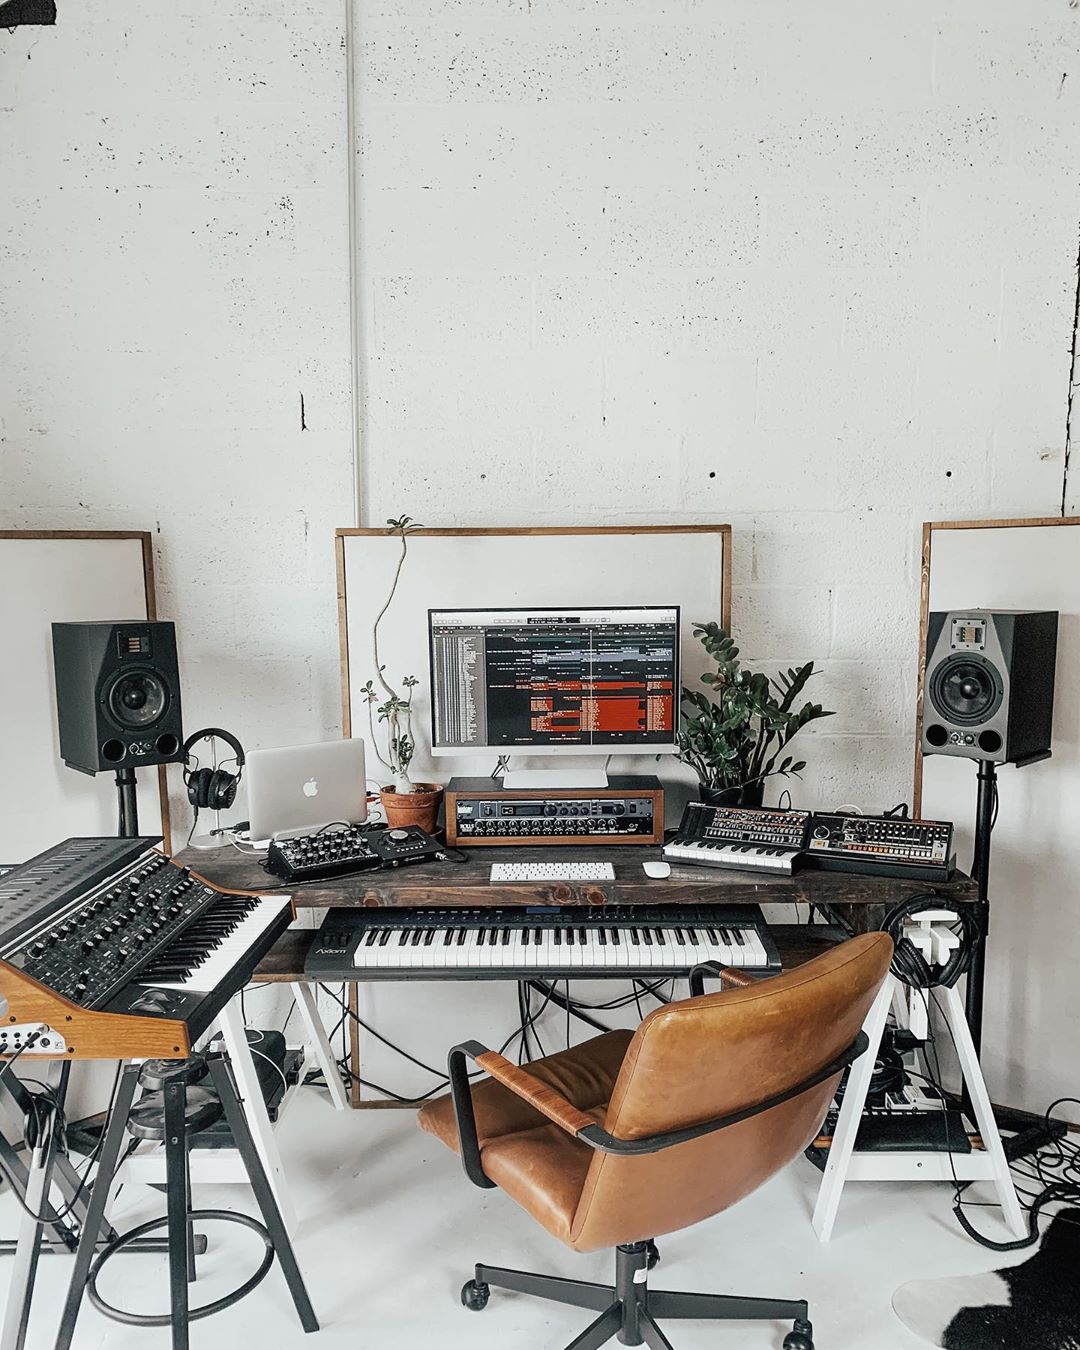 At Home Music Studio Space with Keyboards and Soundproofing. Photo by Instagram user @austinwcannon